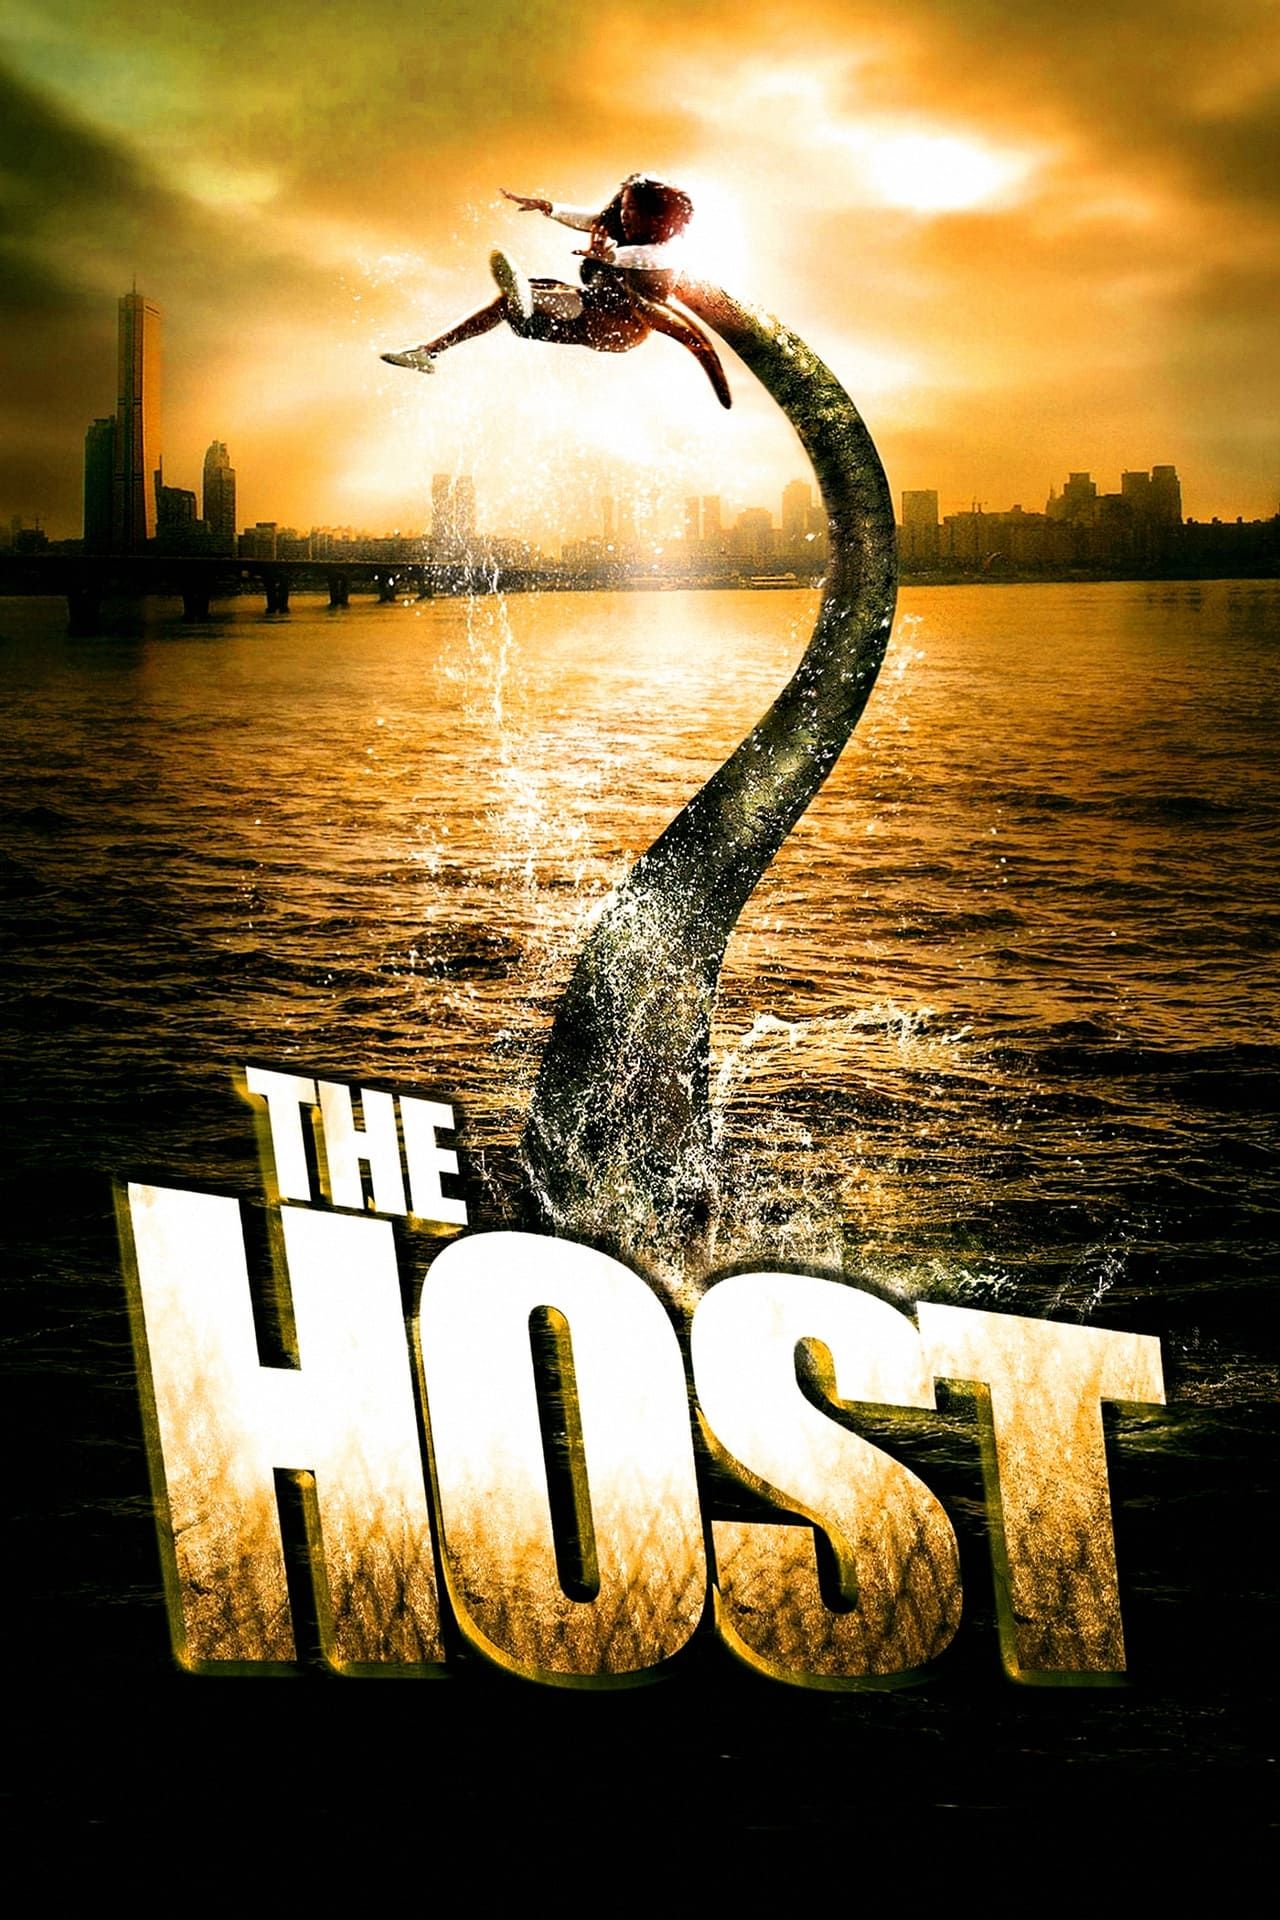 The Host Movie Poster Showing a Monster's Arm Grabbing a Woman and Pulling her Into the Ocean